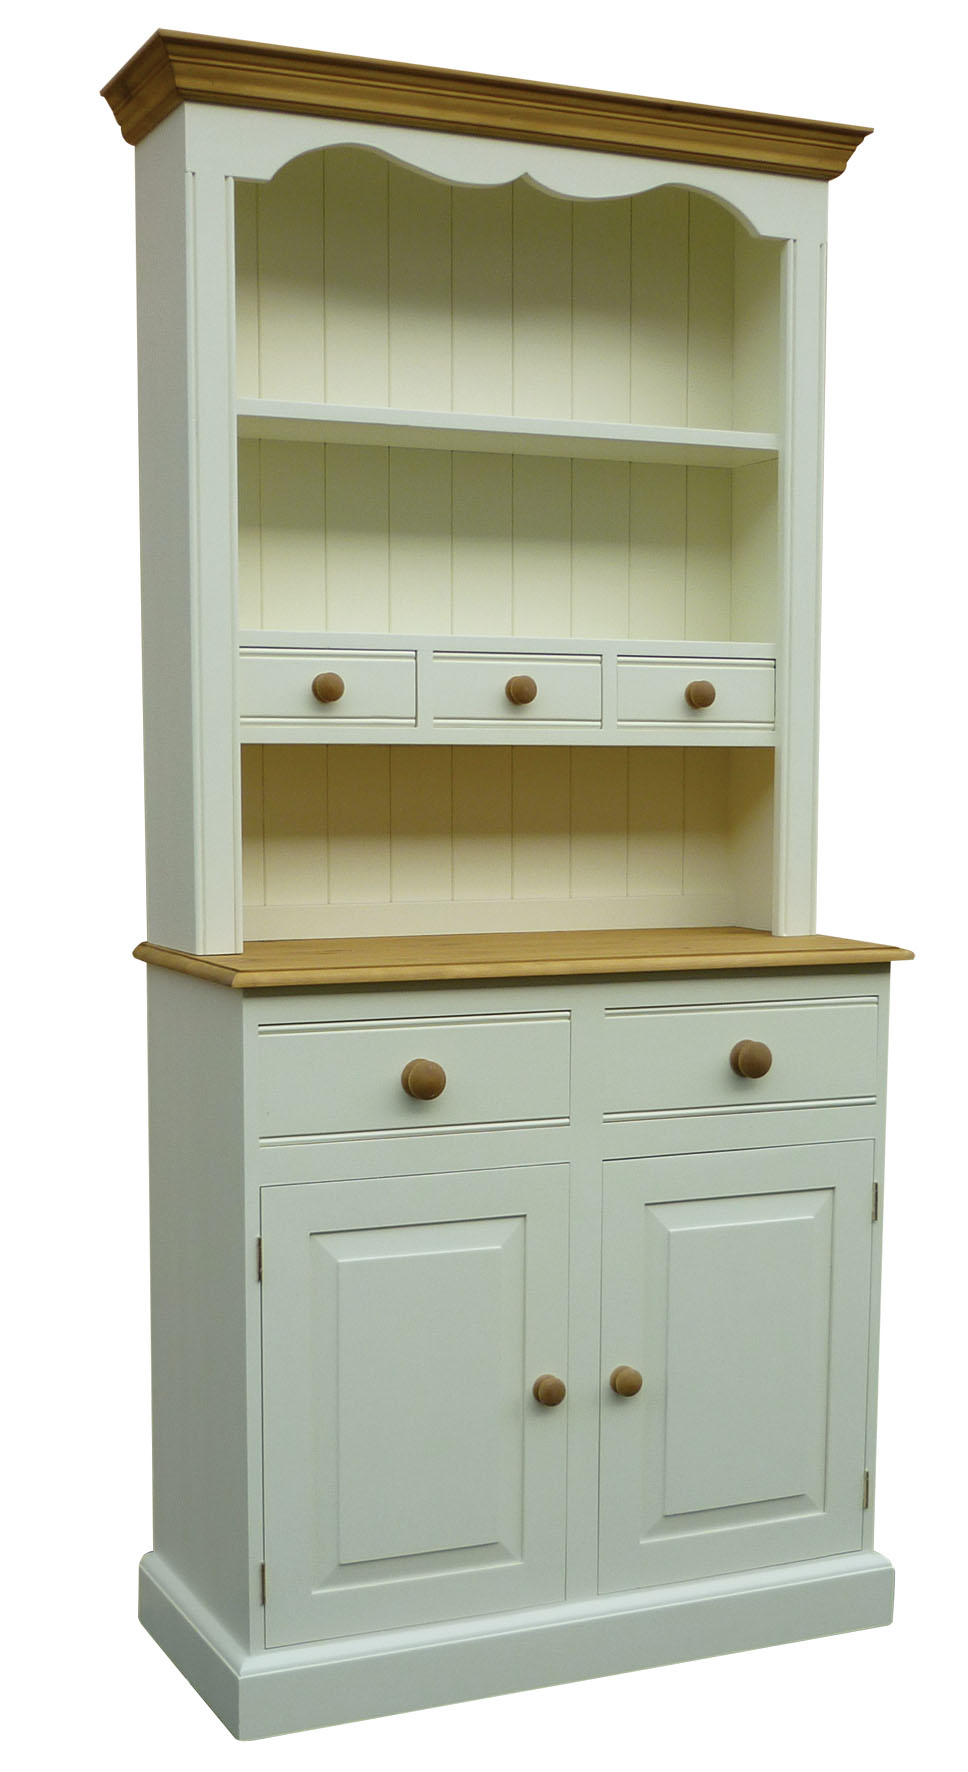 Traditional Kitchen Dresser with Spice Drawers in top